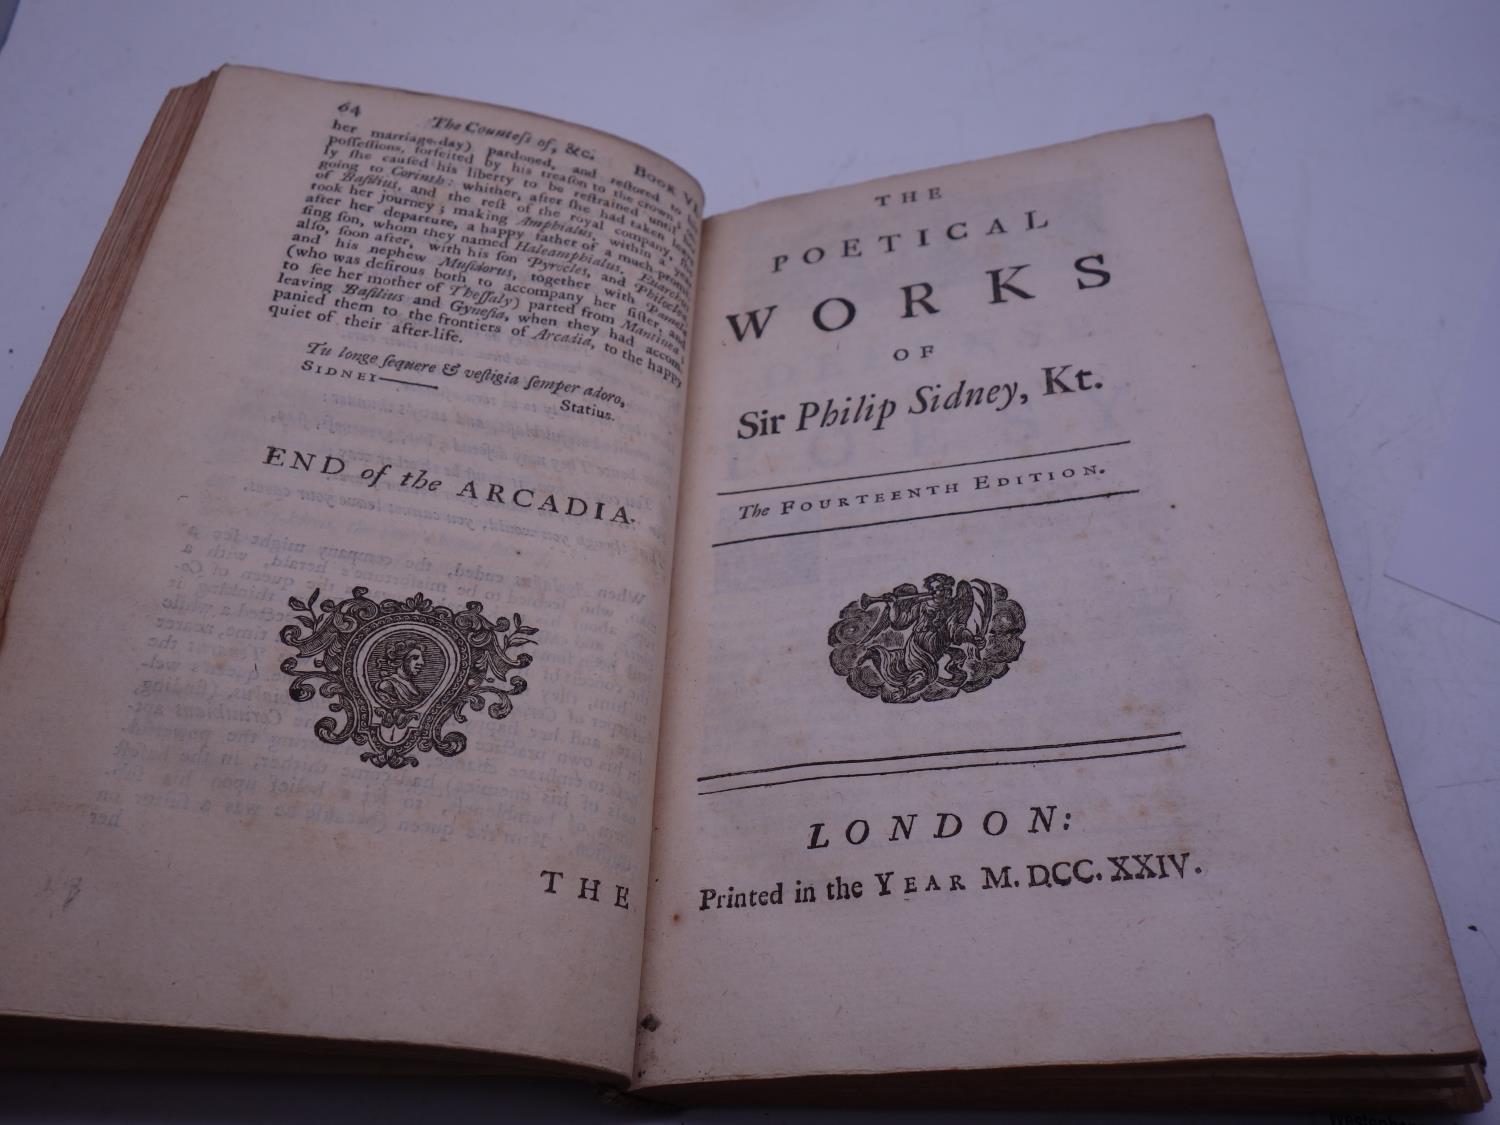 Single copy of the Works of the Honourable Sir Philip Sidney volume 3, published London 1633, The - Image 7 of 8